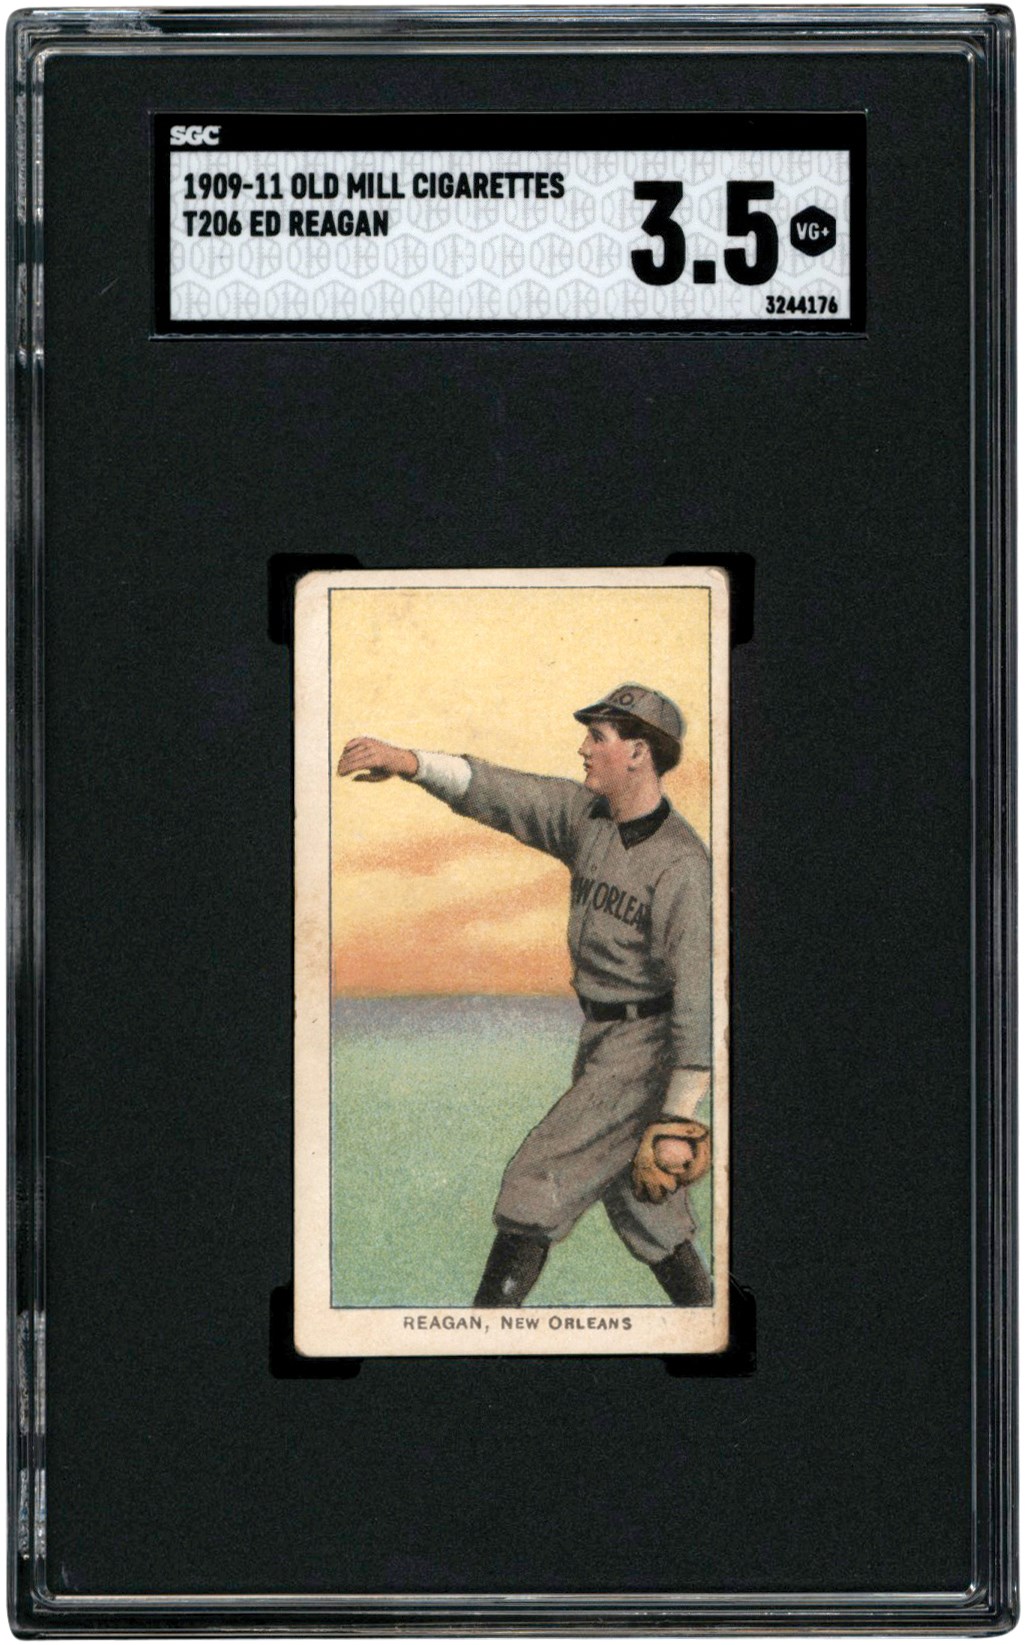 - 909-1911 T206 Ed Reagan Old Mill Back Card SGC VG+ 3.5 Southern Leaguer